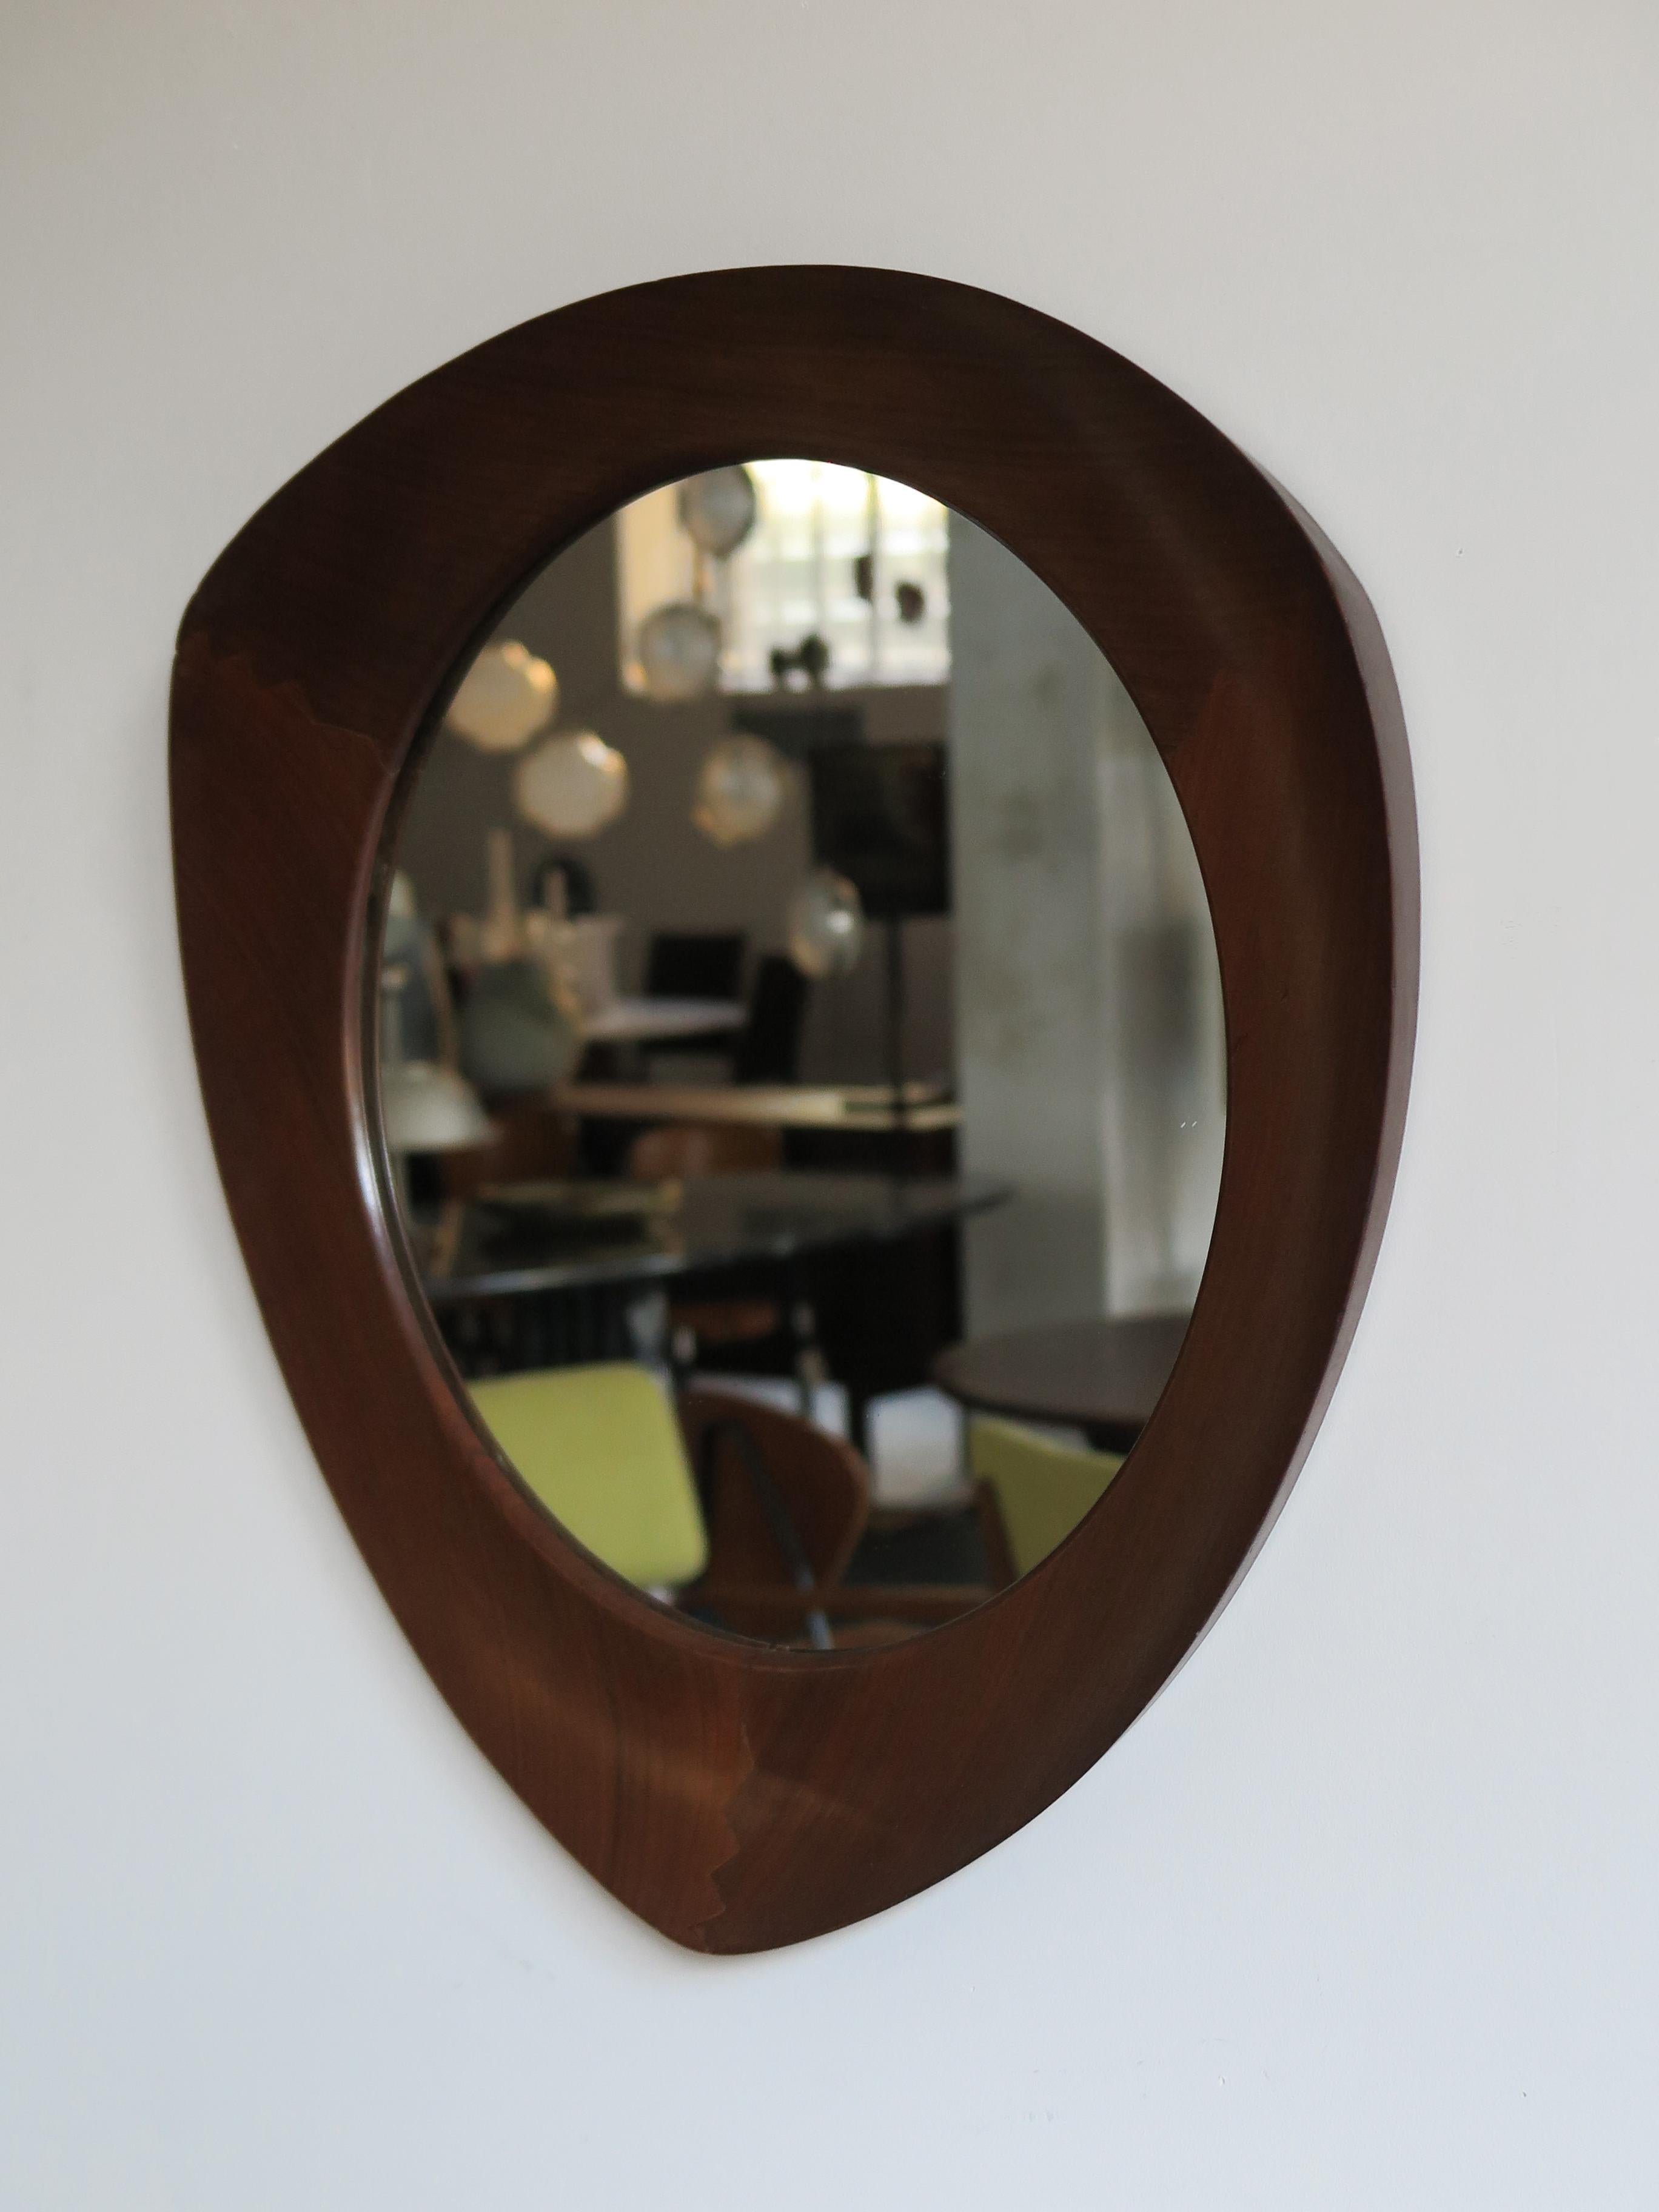 Amazing Mid-Century Modern design wall mirror designed by Franco Campo & Carlo Graffi for Home with wonderful triangular shaped interlocking frame in solid wood, 1950s

Bibliography:
I. de Guttry, M. P. Maino, Italian furniture from the 1940s and